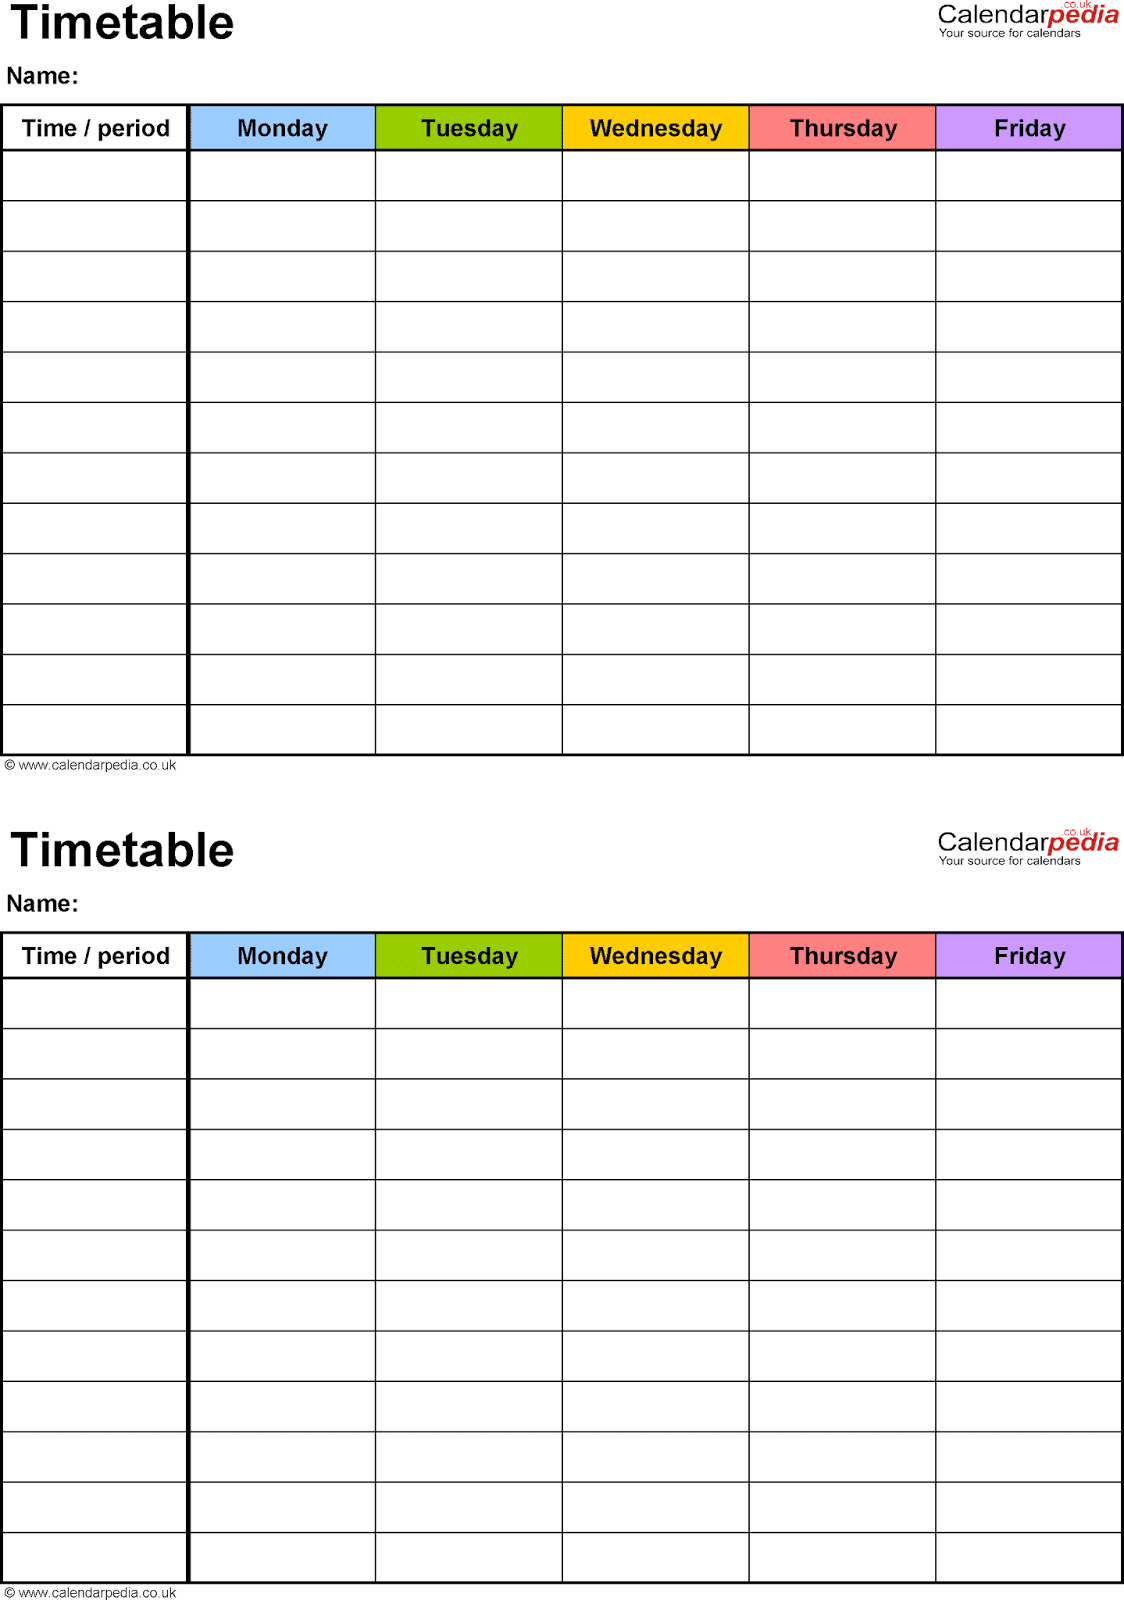 Timetable Templates For School in Excel Format